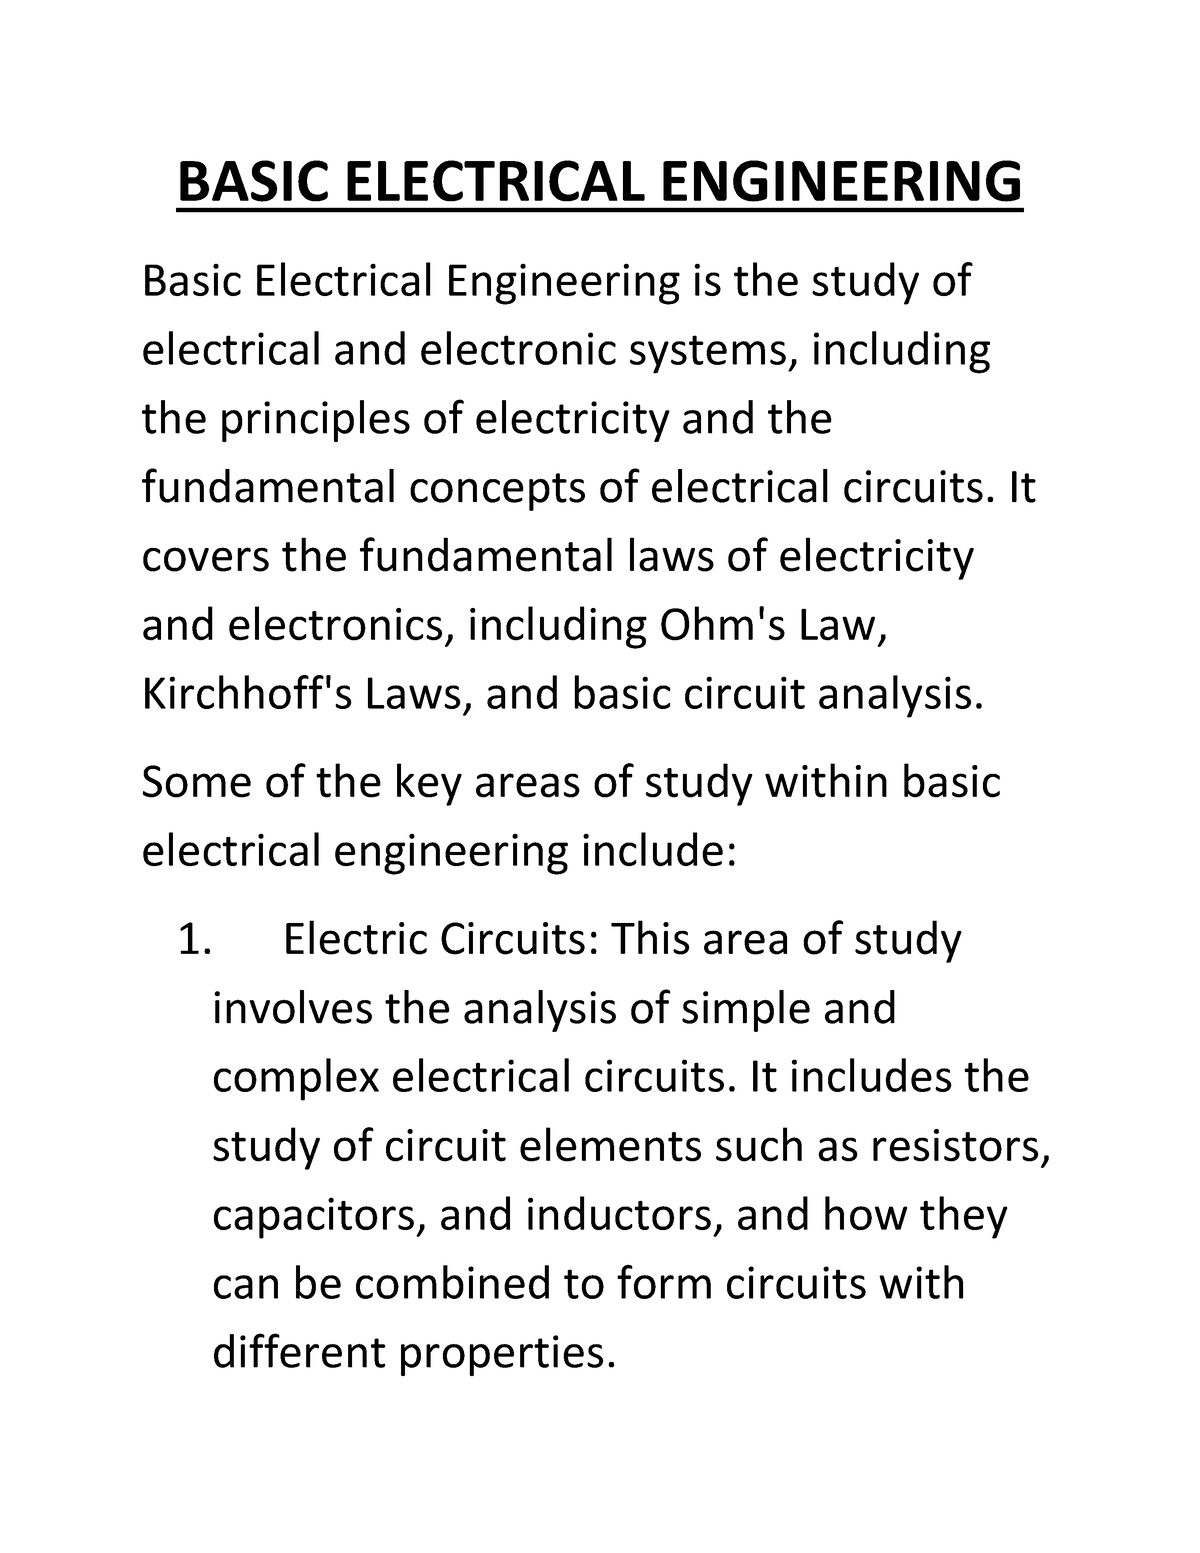 thesis related to electrical engineering